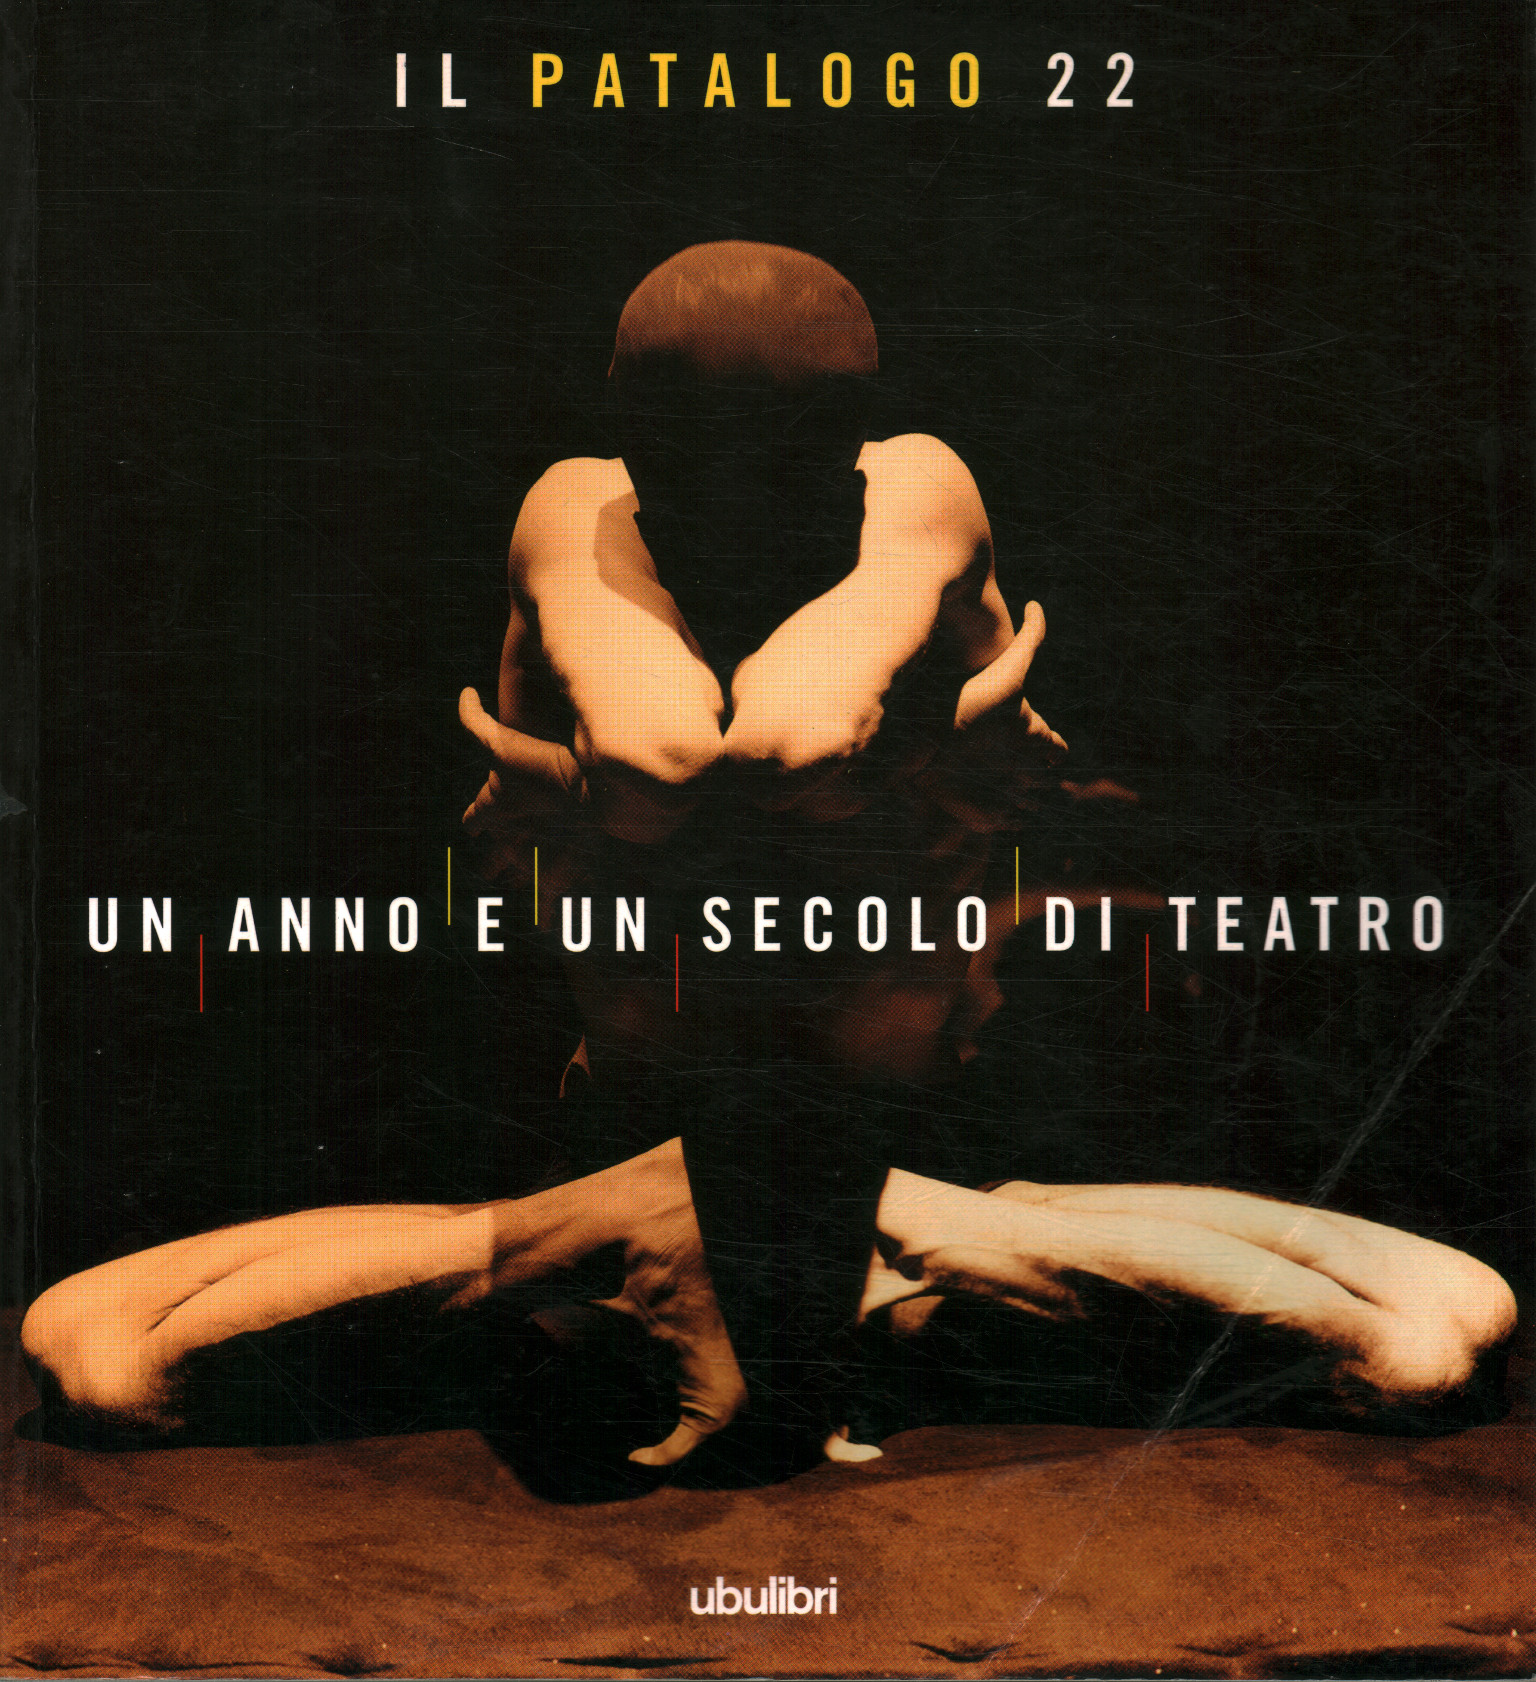 Il Patologo 22. One year and a century%, Il Patalogo 22. One year and a century%, Il Patalogo twenty-two. A year and a s